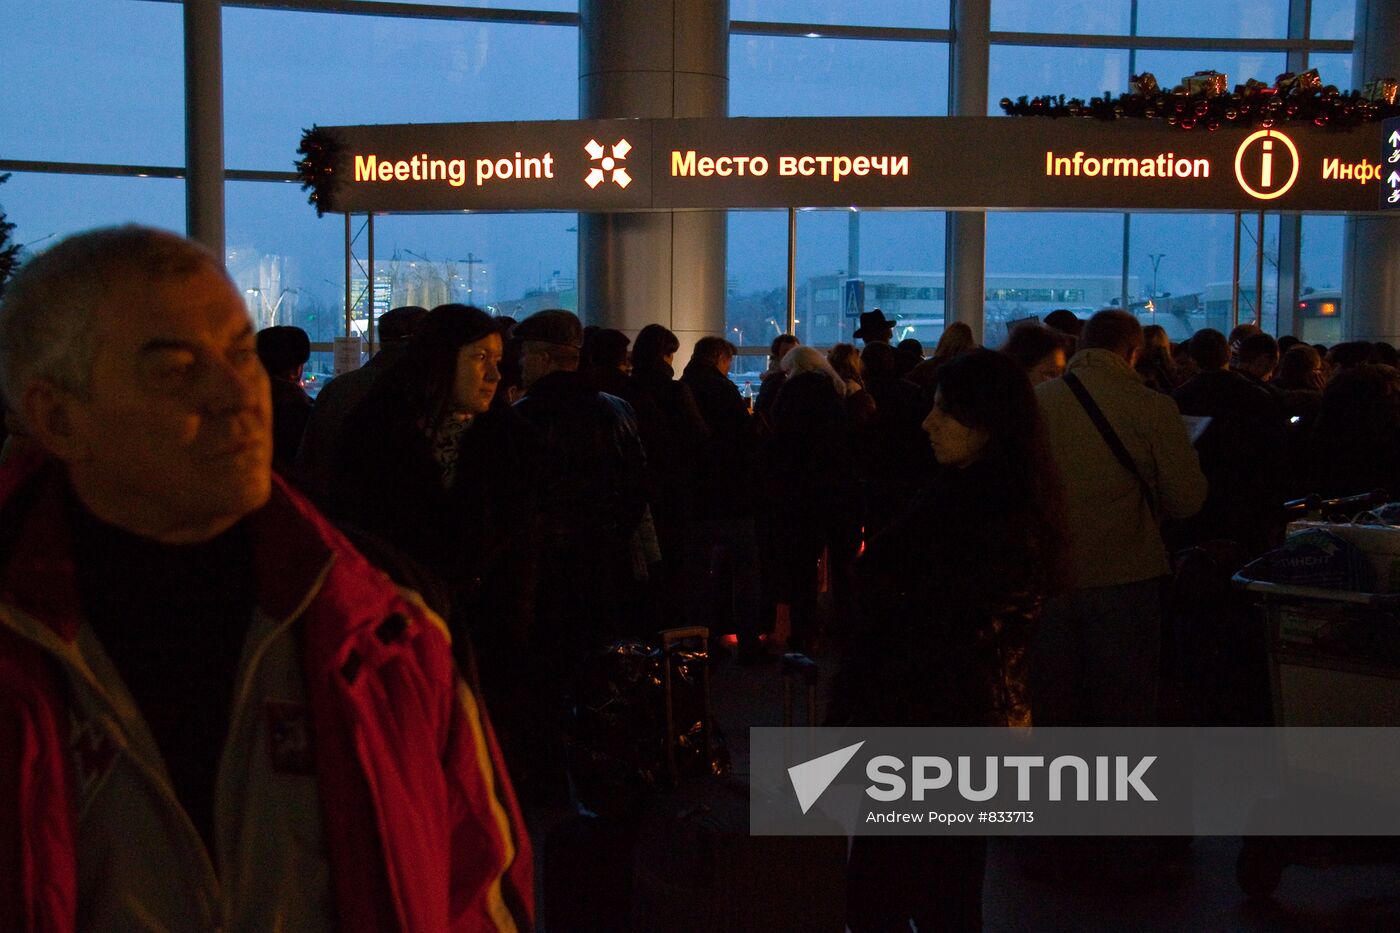 Delayed airflights in Domodedovo airport